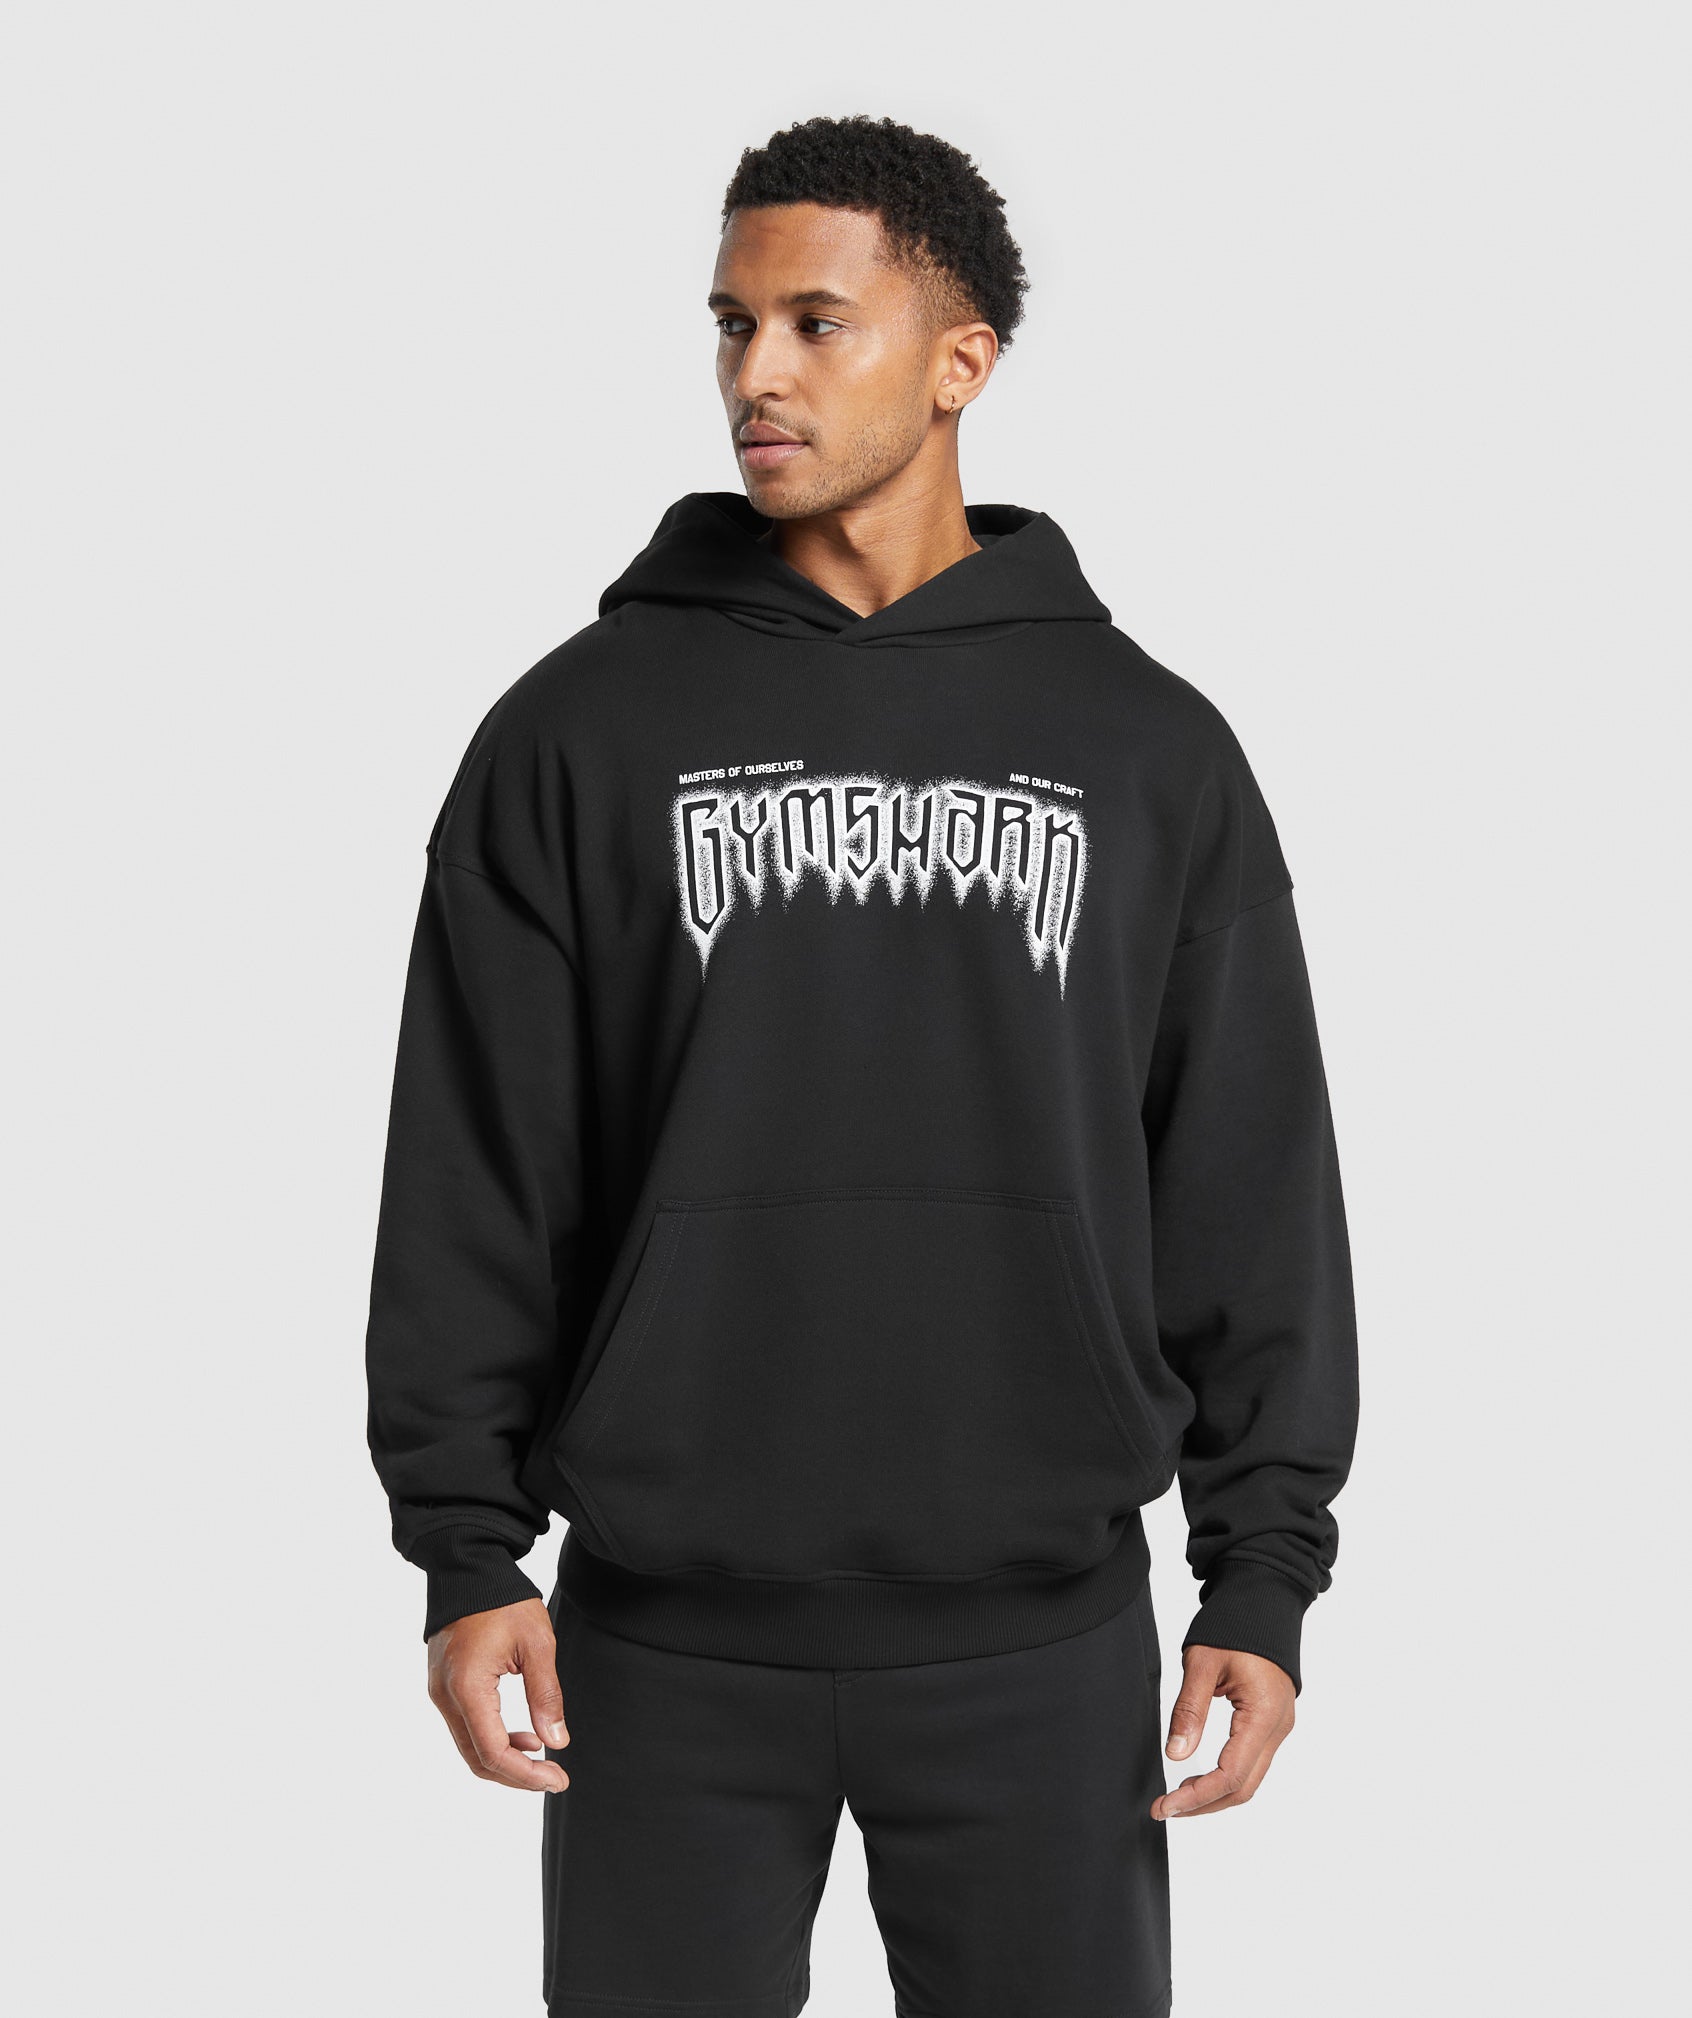 Masters of Our Craft Hoodie in Black - view 1